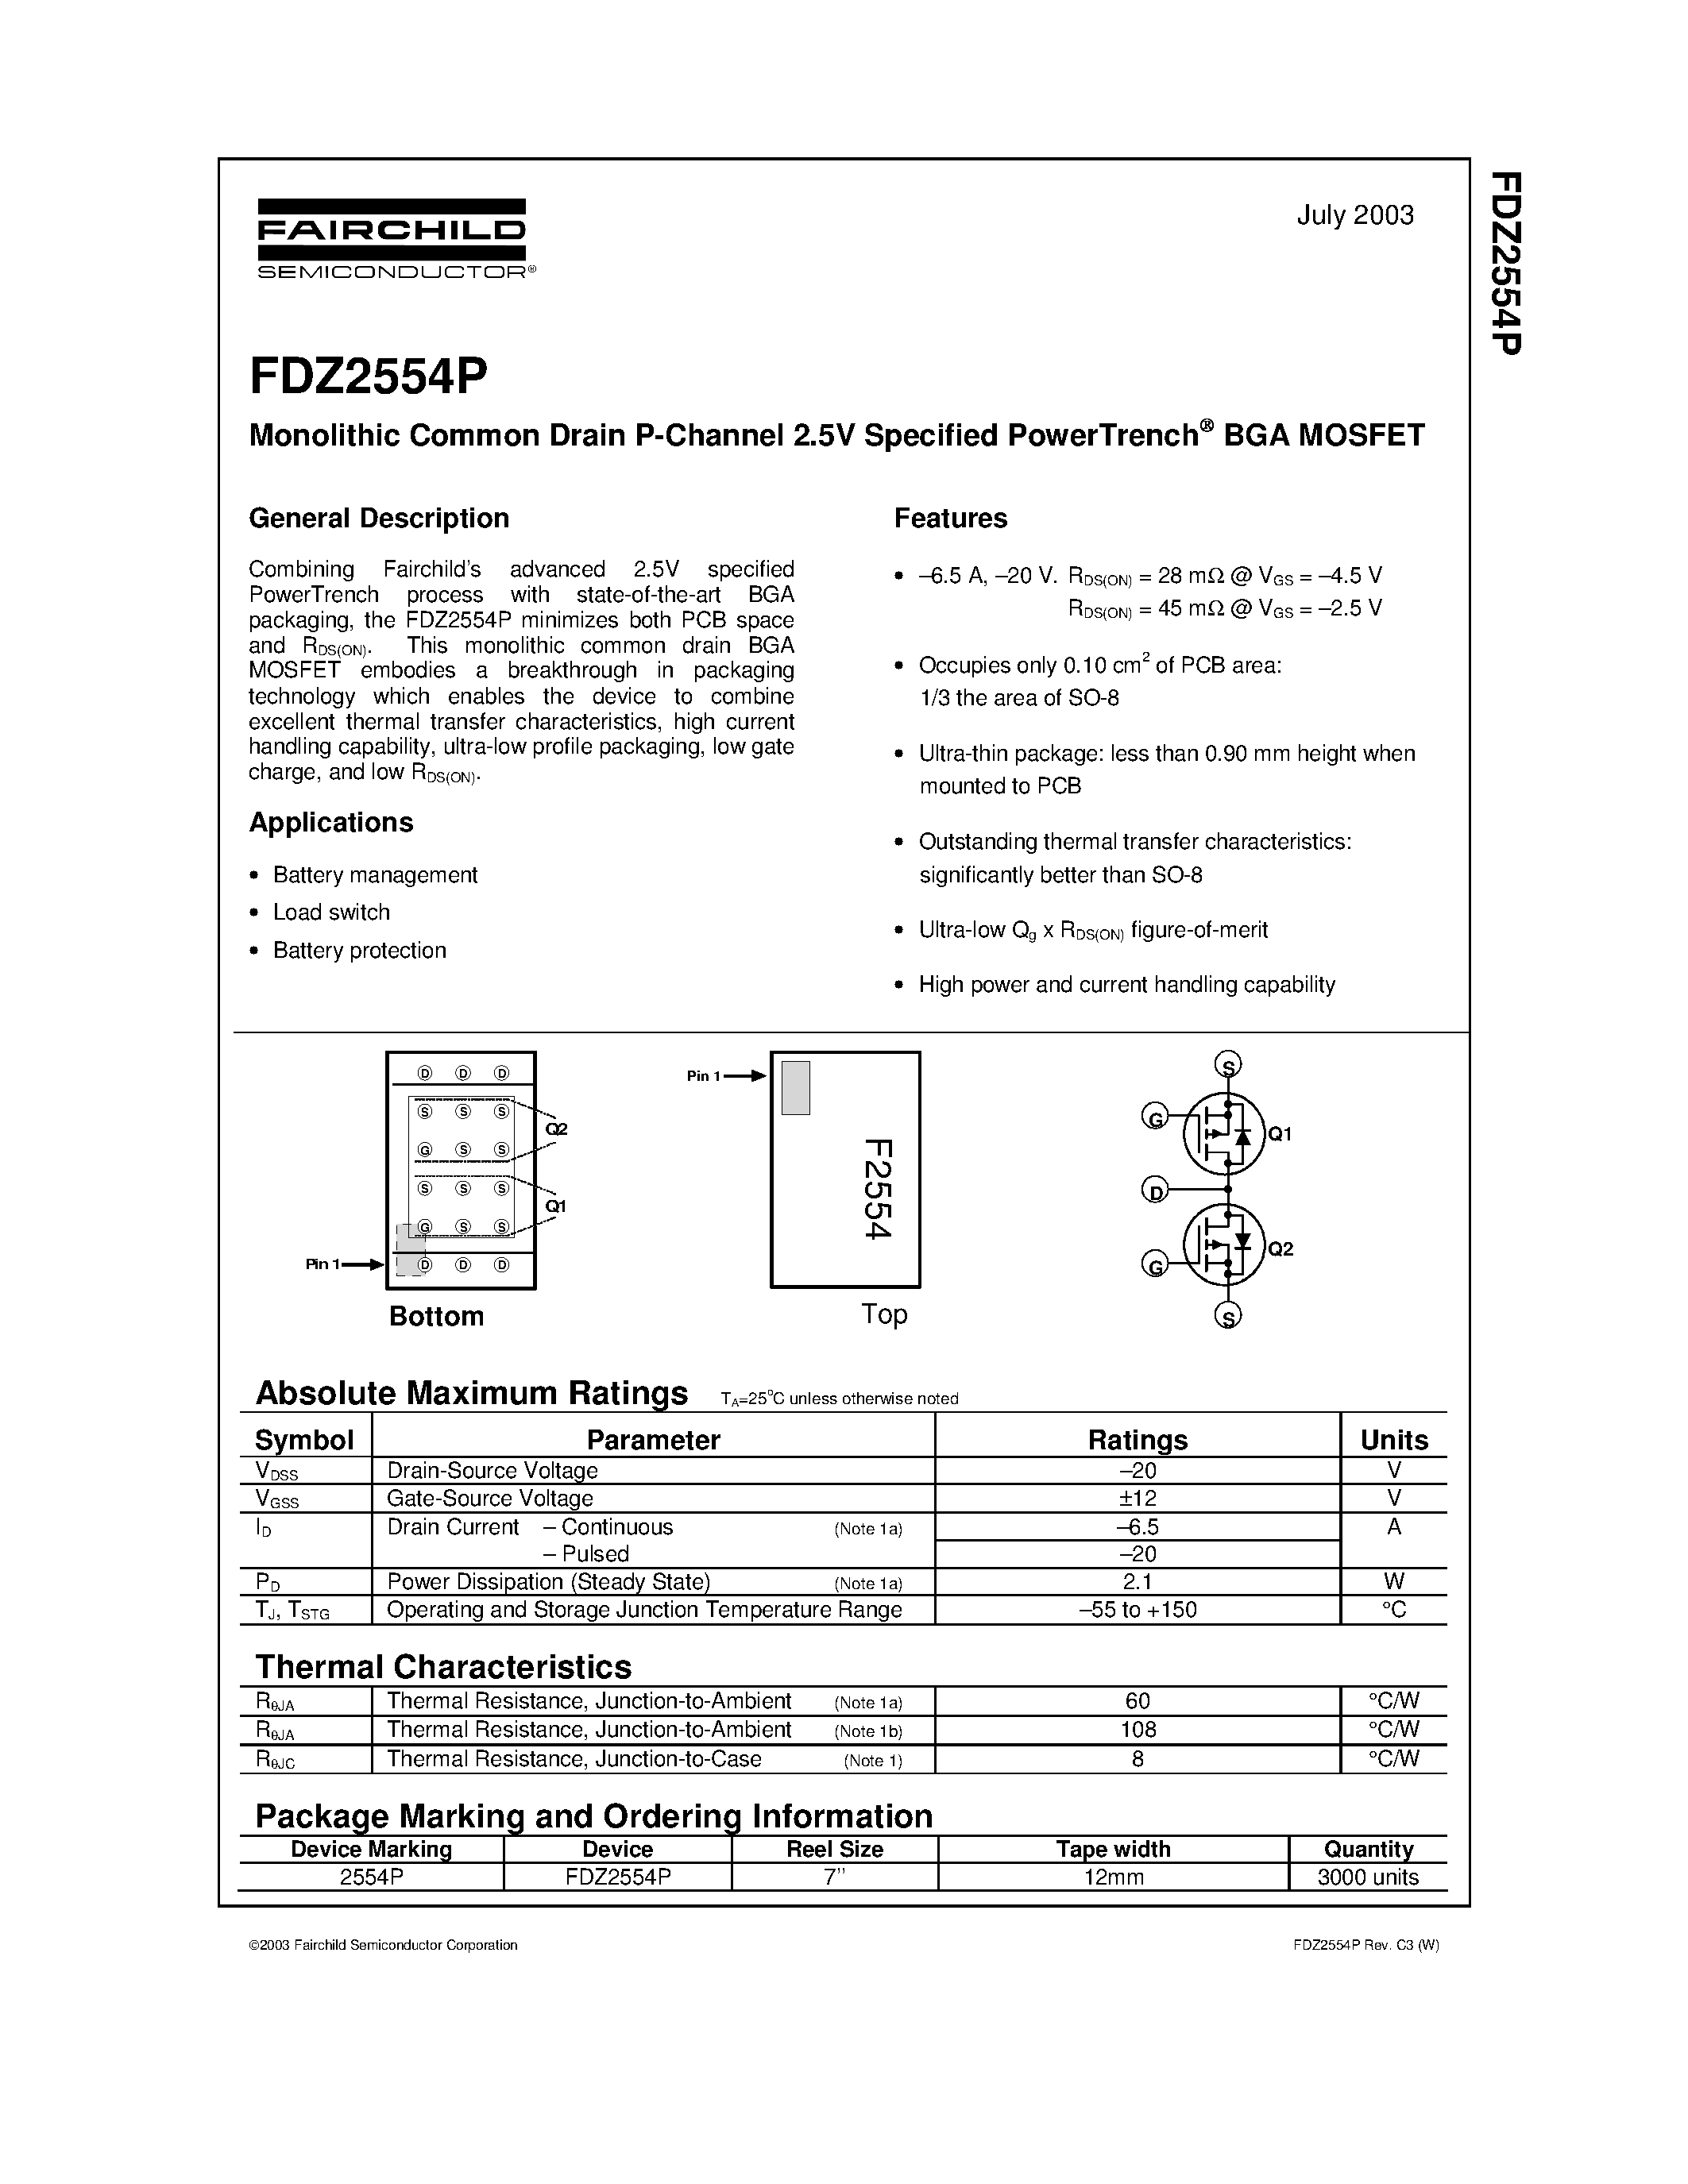 Datasheet FDZ2554P - Monolithic Common Drain P-Channel 2.5V Specified PowerTrench page 1